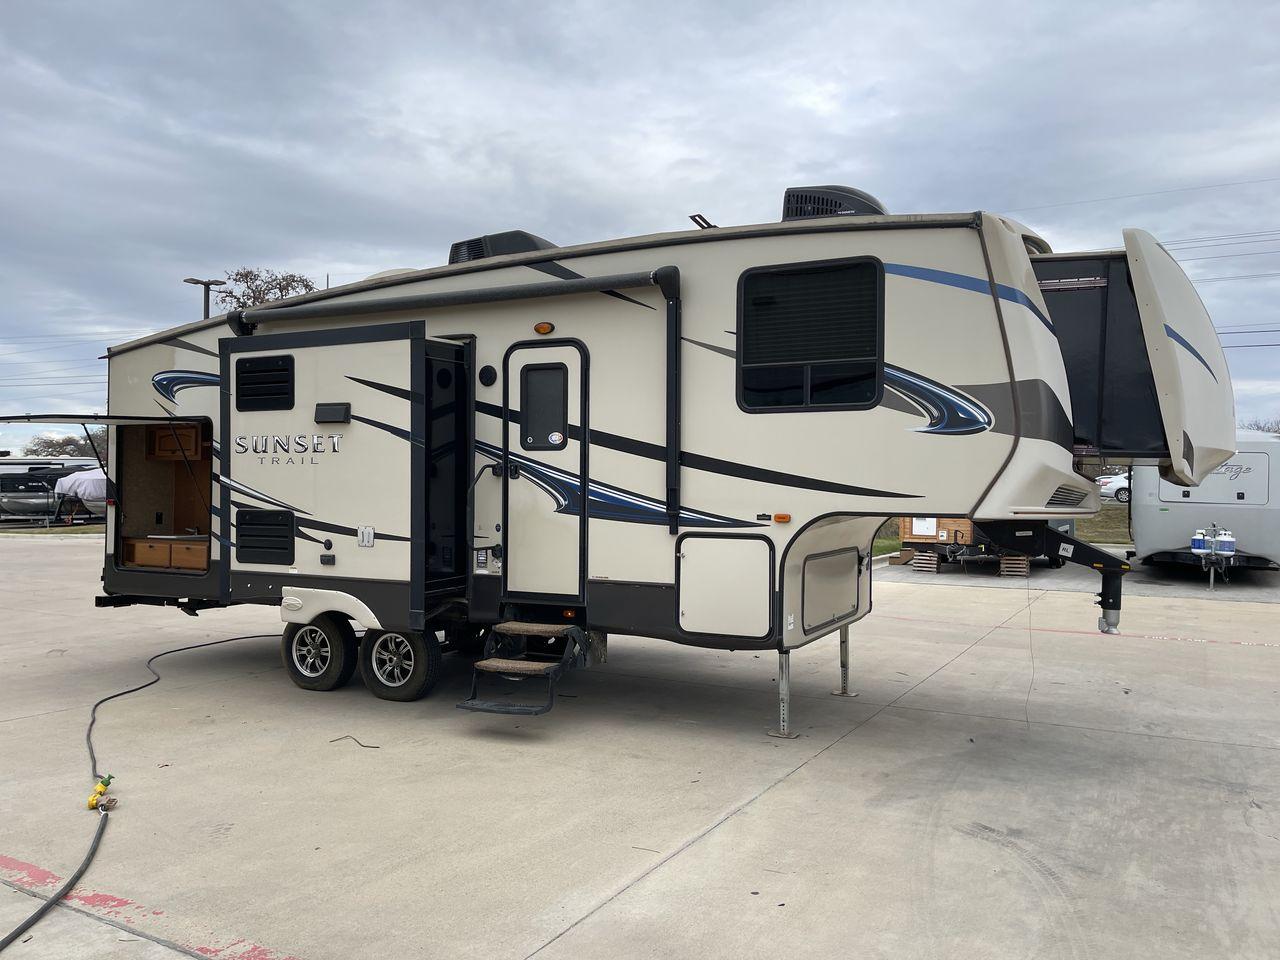 2015 CROSSROADS SUNSET TRAIL RESERVE (4V0FC2624FB) , Length: 30.17 ft | Dry Weight: 6,401 lbs | Gross Weight: 9,542 lbs | Slides: 2 transmission, located at 4319 N Main St, Cleburne, TX, 76033, (817) 678-5133, 32.385960, -97.391212 - This model has the right mix of space and maneuverability, with a length of 30 feet and a dry weight of 6,401 pounds. With a strong aluminum frame and fiberglass sidewalls, it will last for a long time on the road, making it a great choice for travelers who want both style and dependability. The Sun - Photo #23